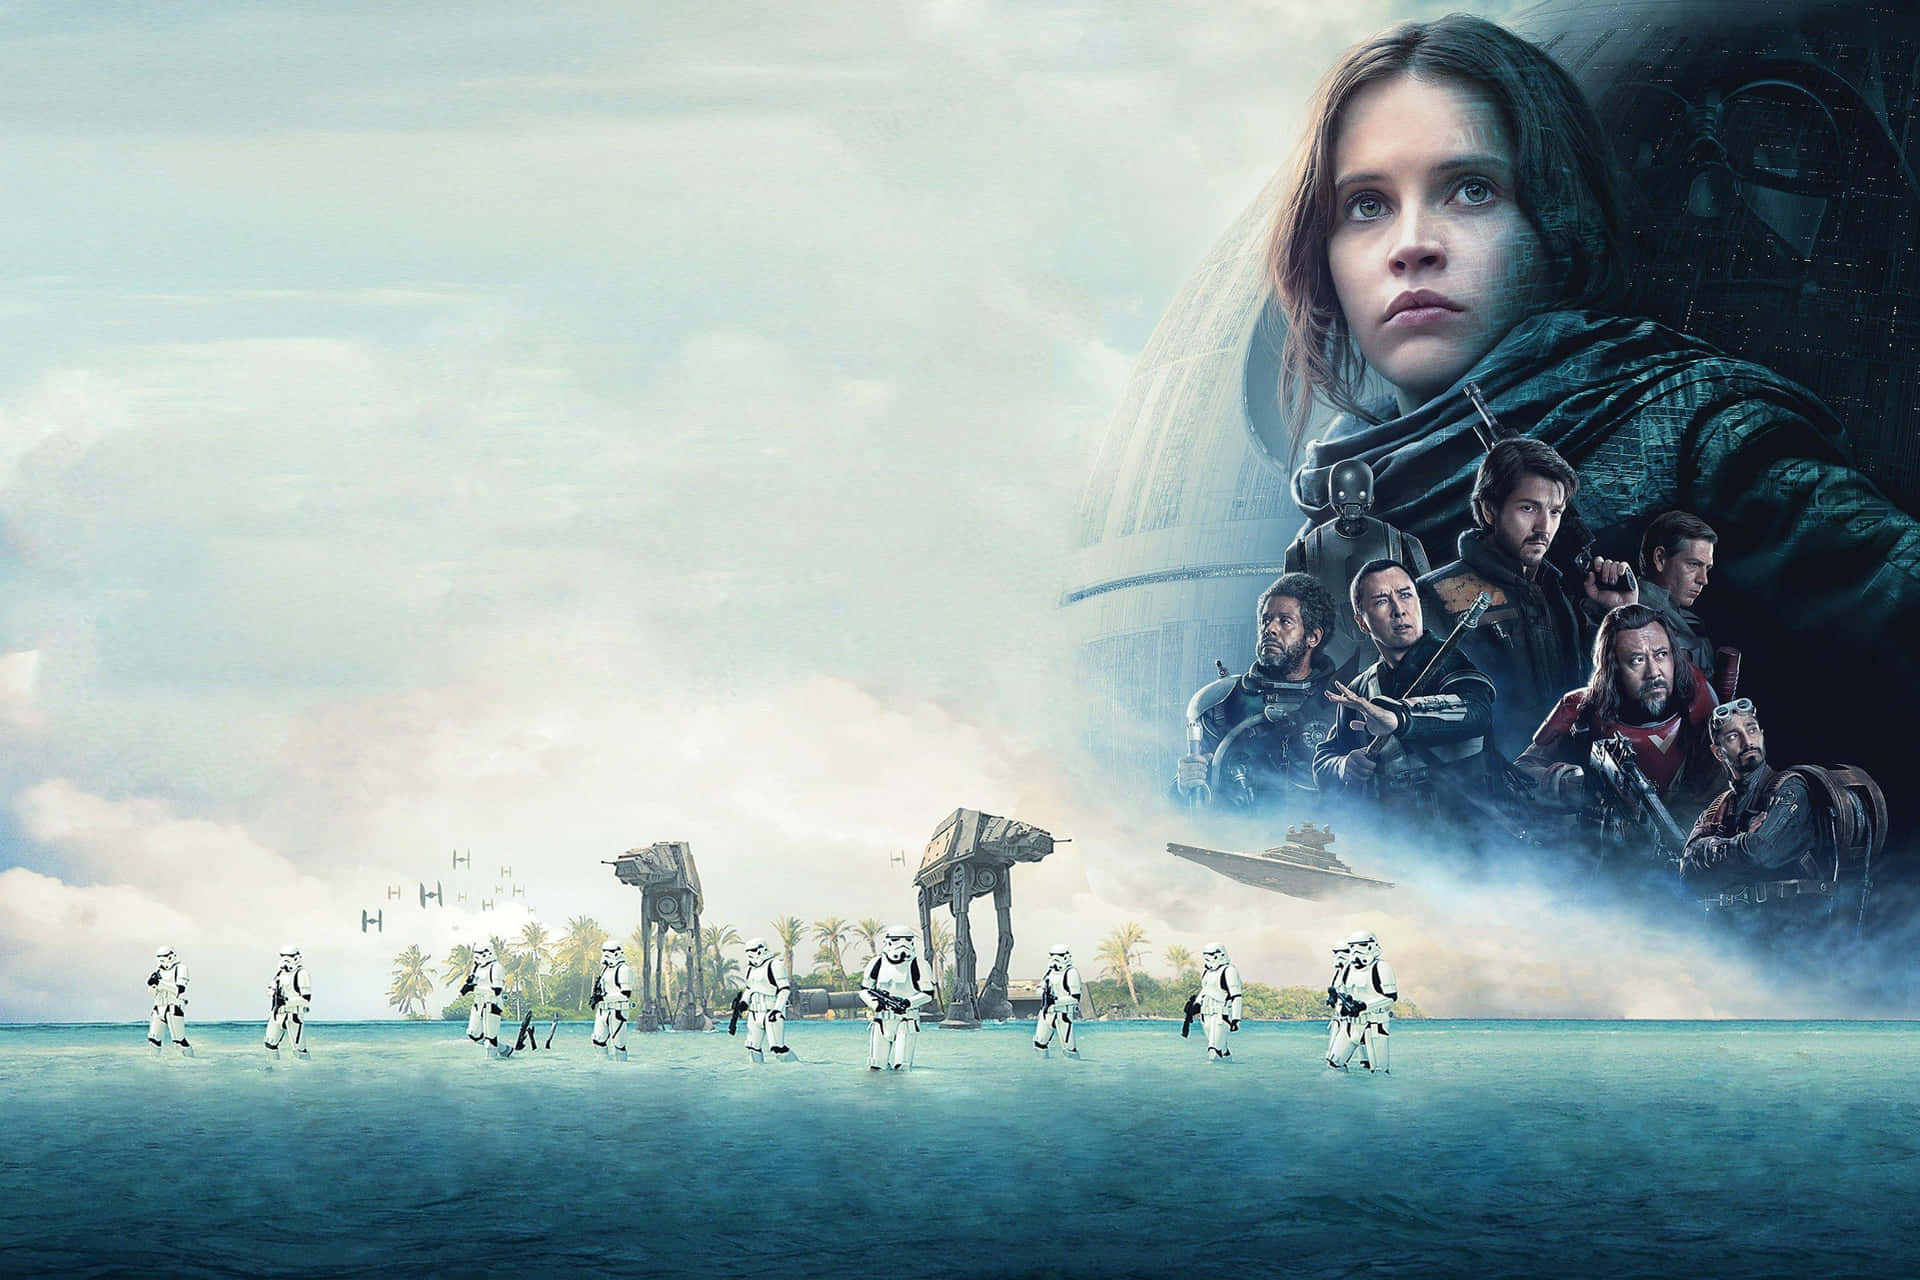 “An Epic Standoff - Jyn Erso and the Rebel Alliance Charge Forth” Wallpaper